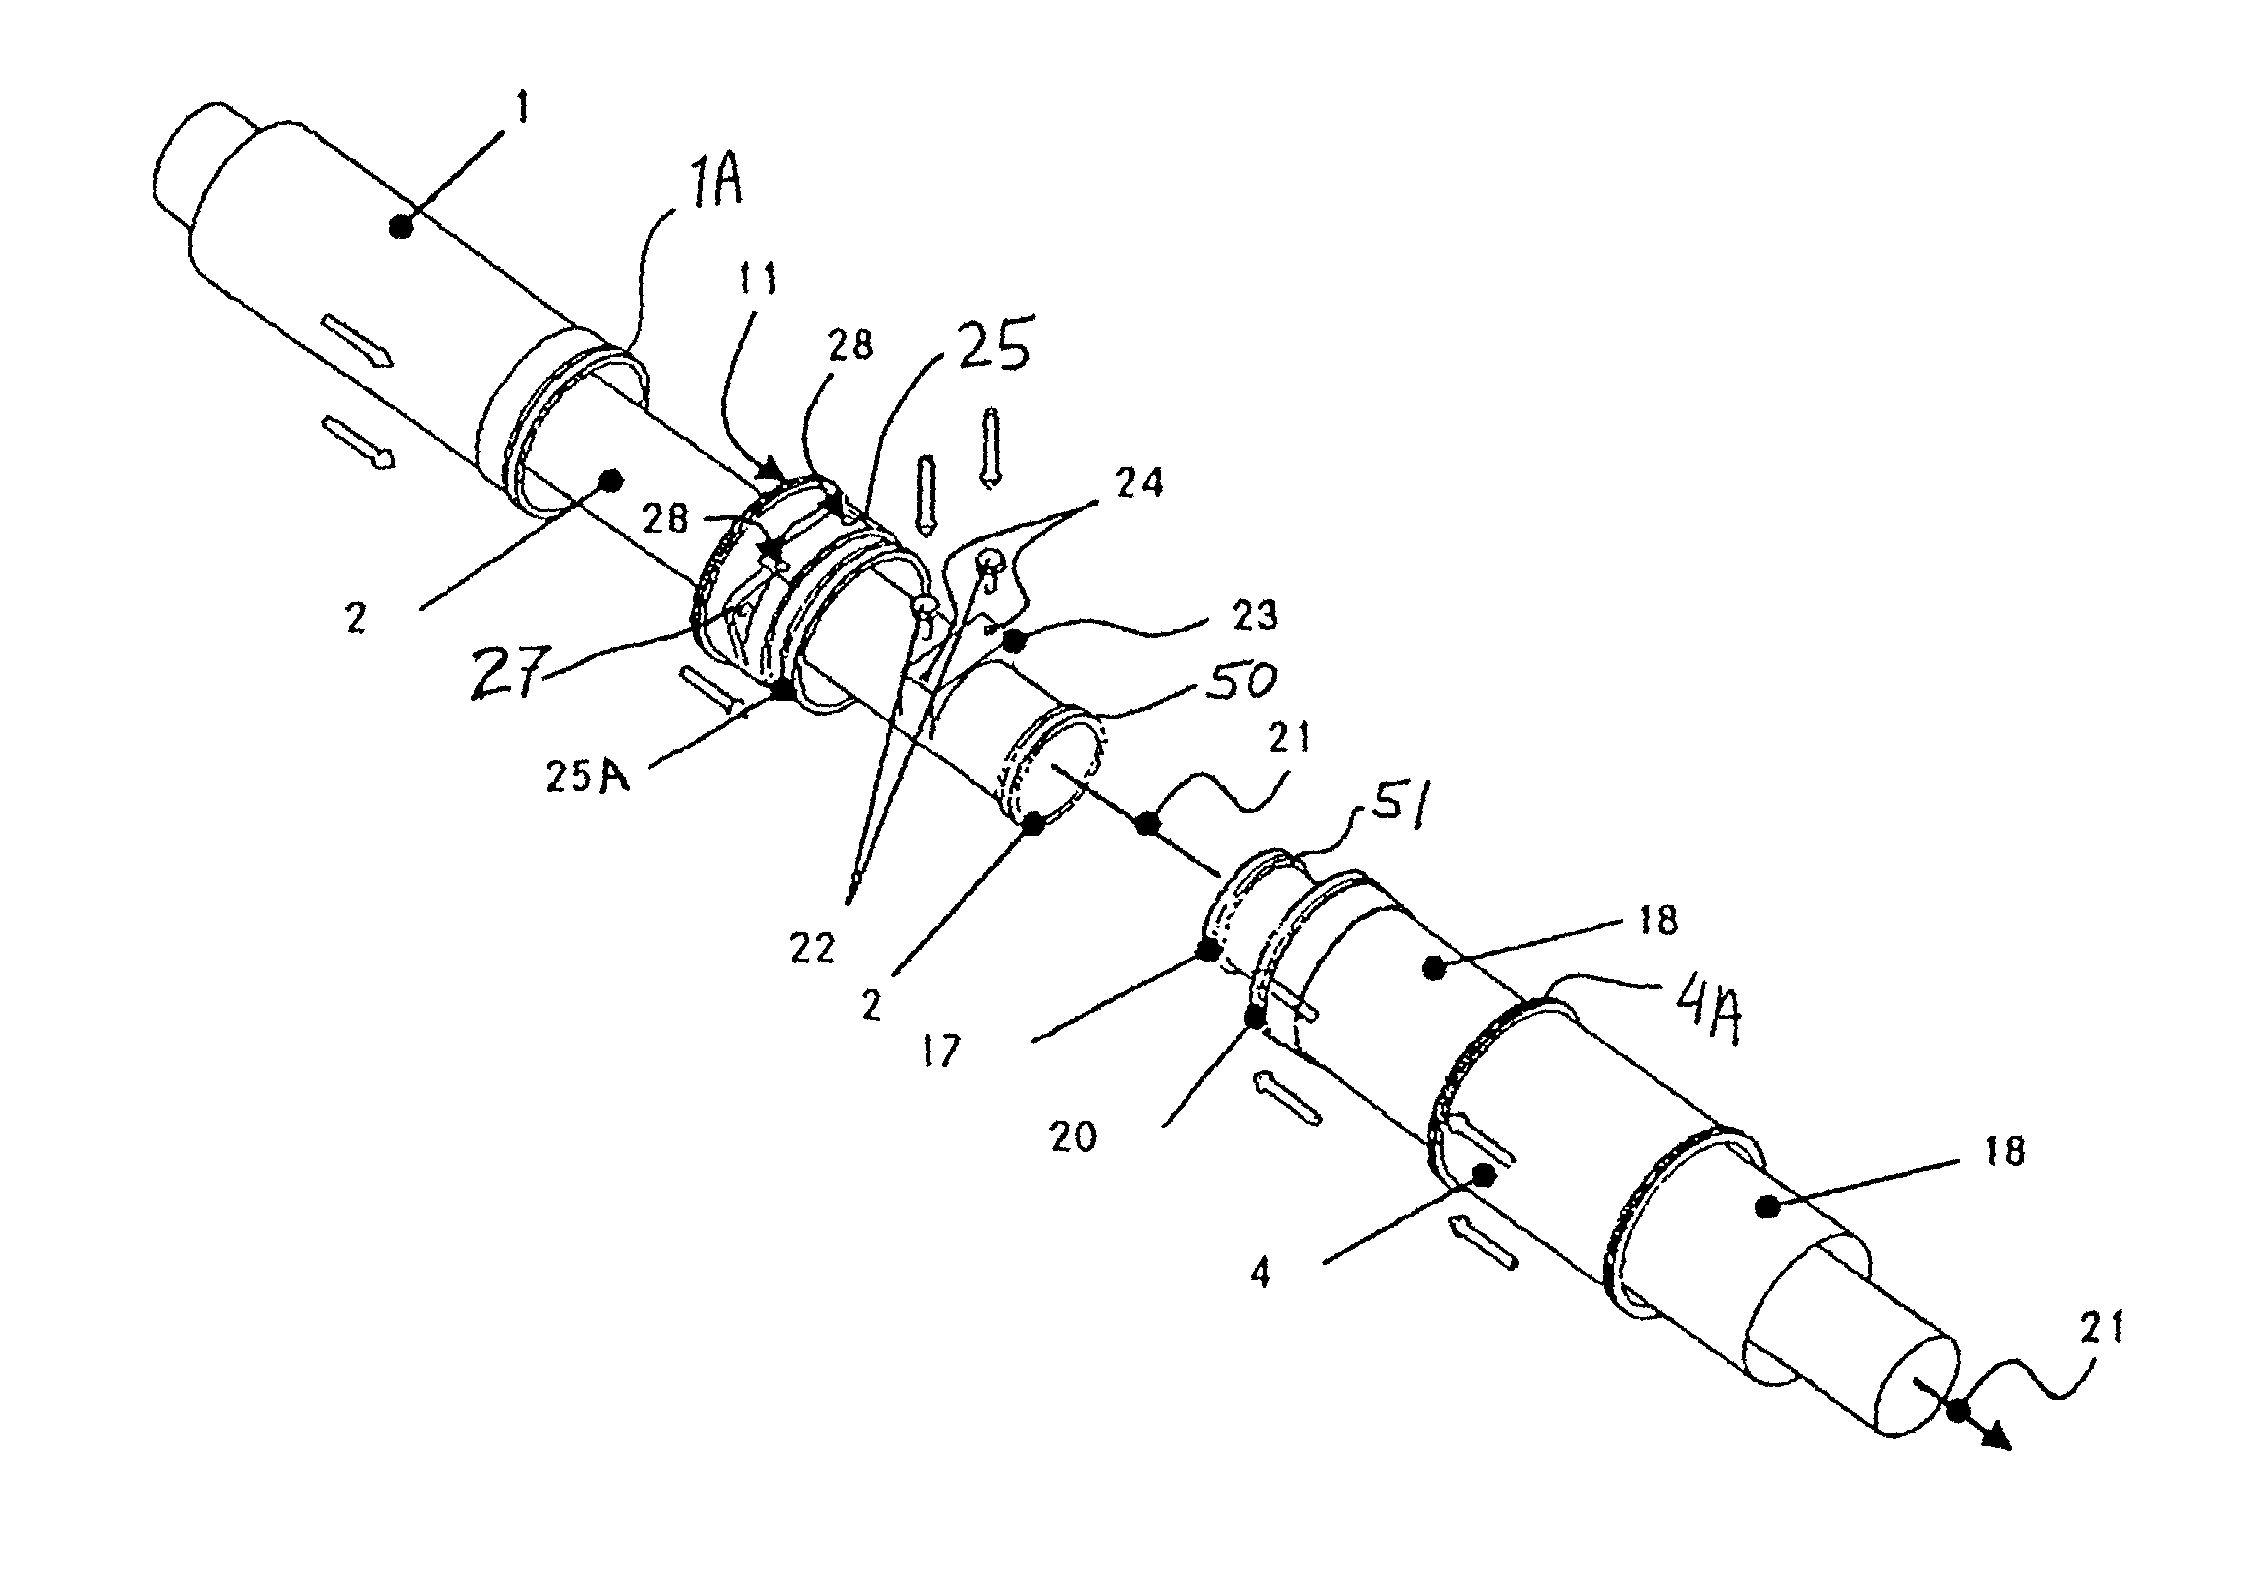 Connection of double-walled pipes